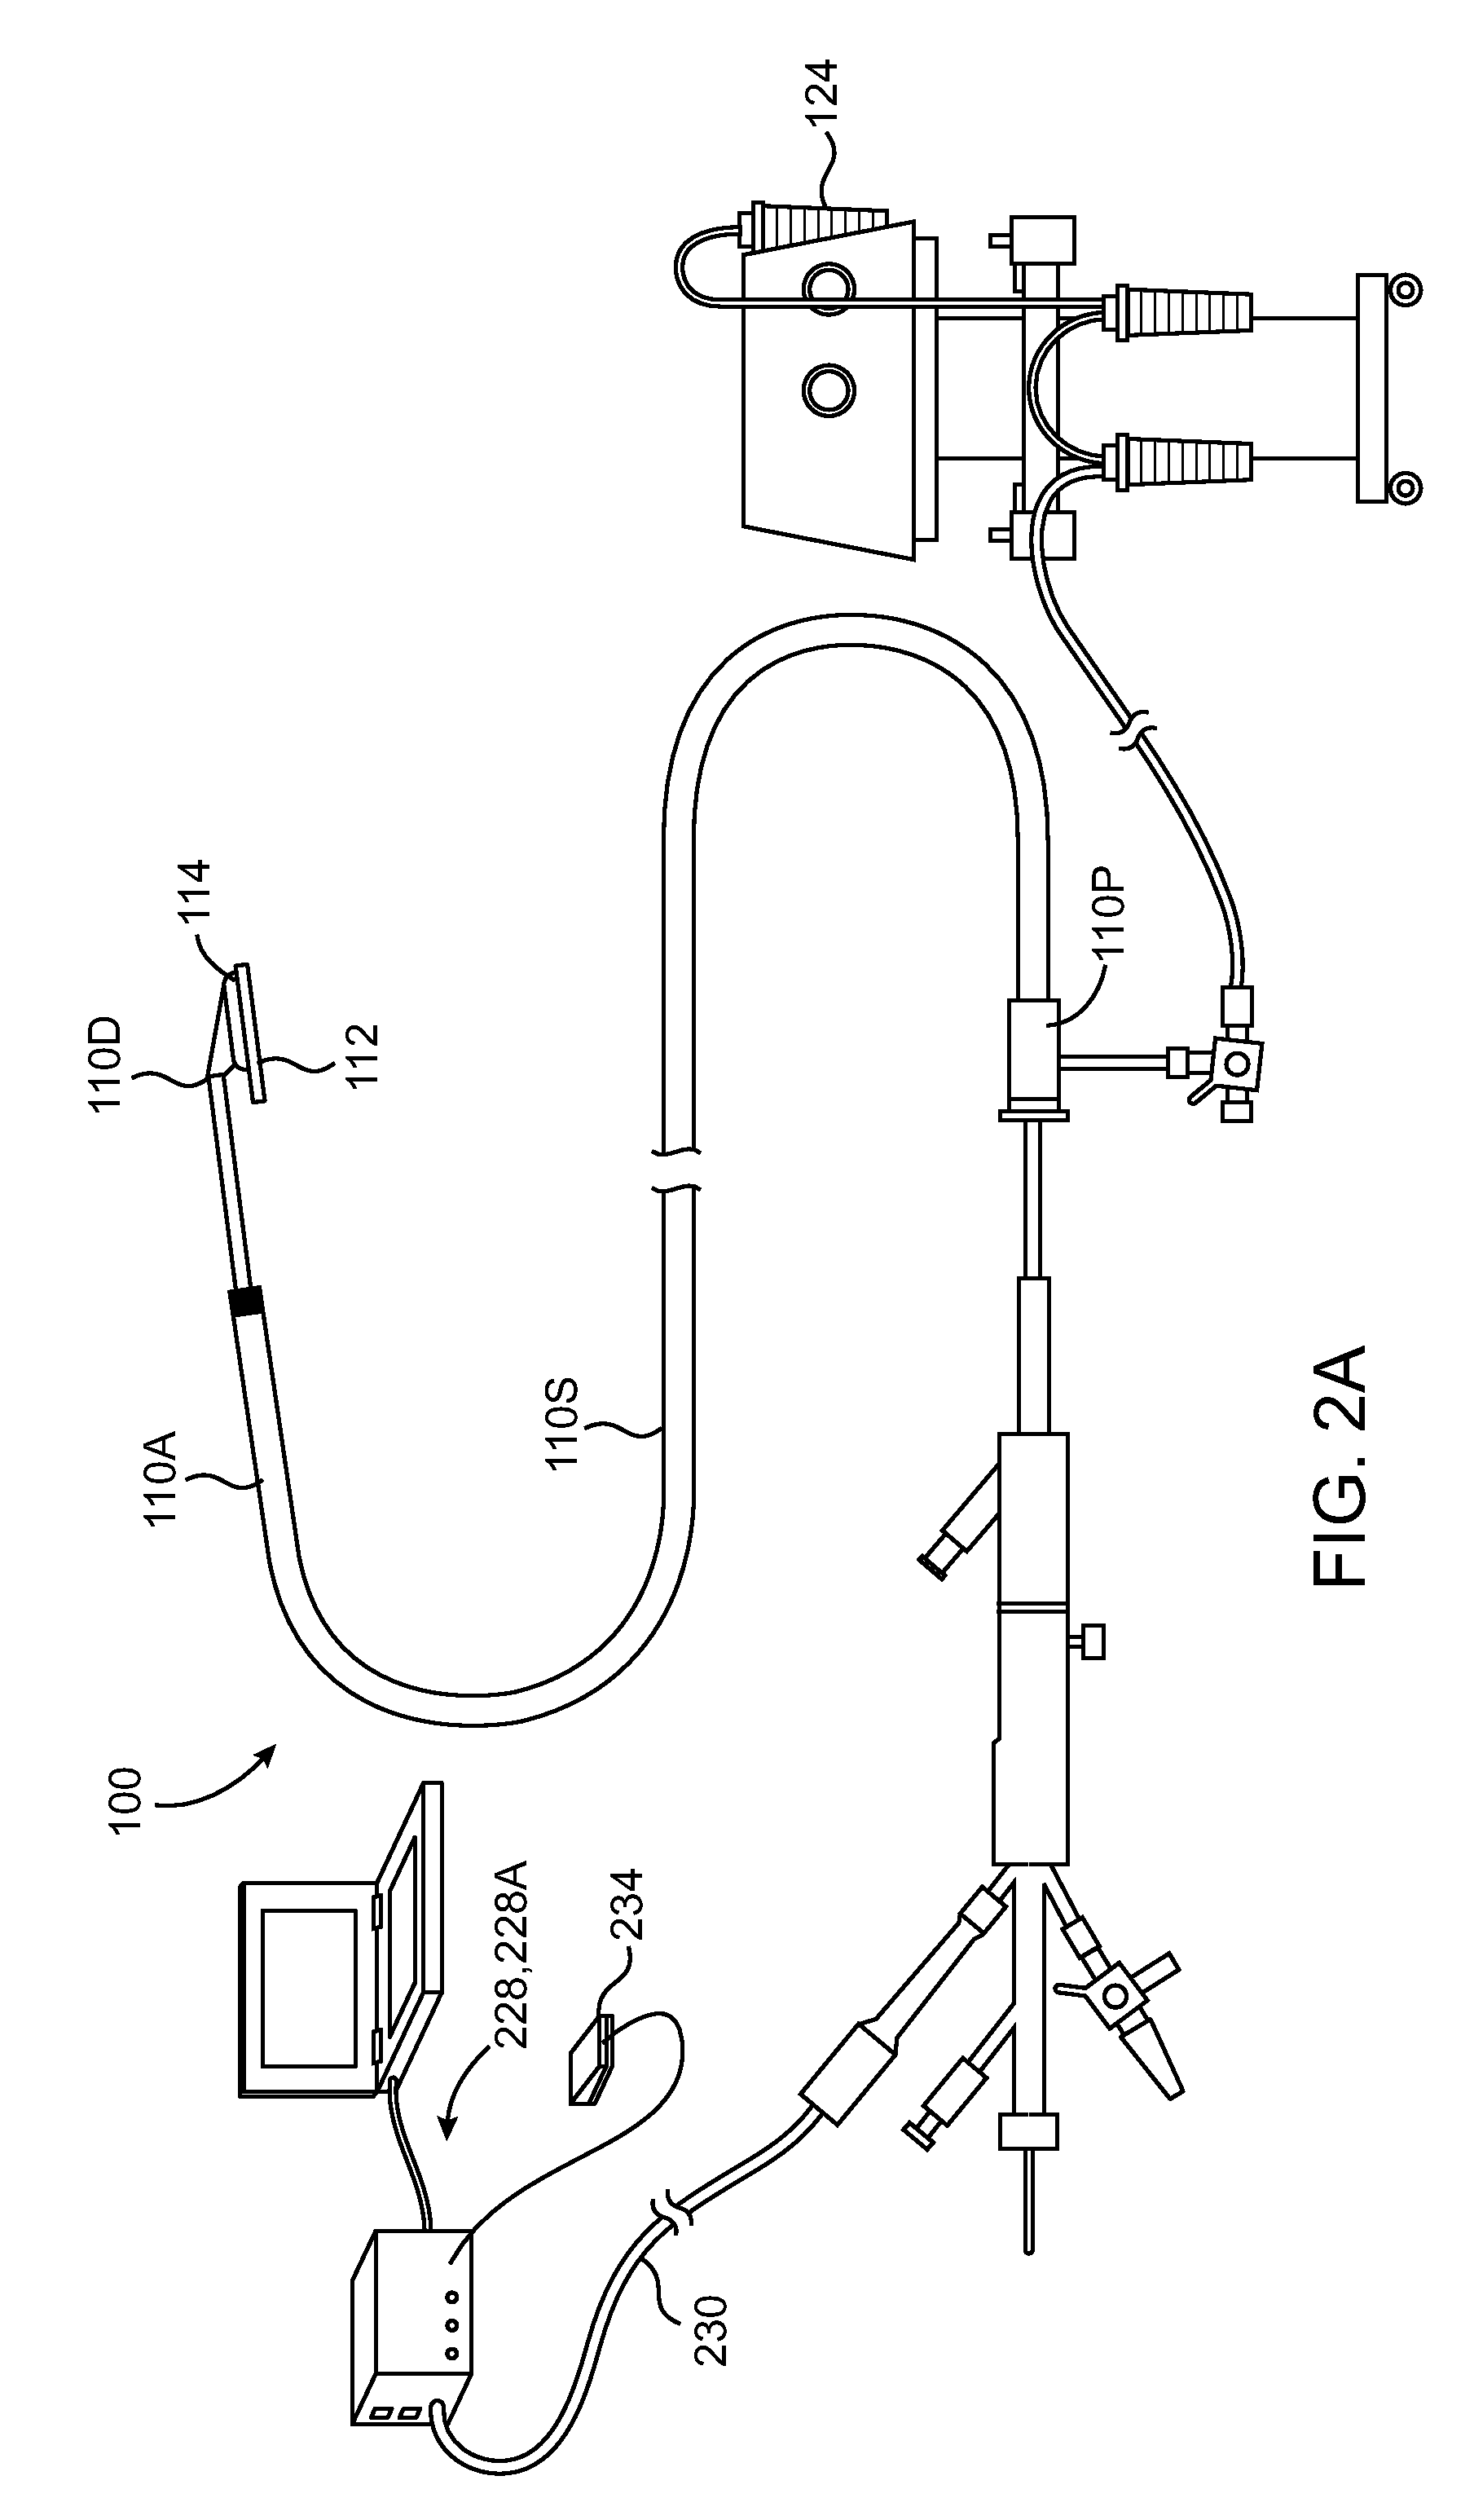 Multi-electrode apparatus for tissue welding and ablation